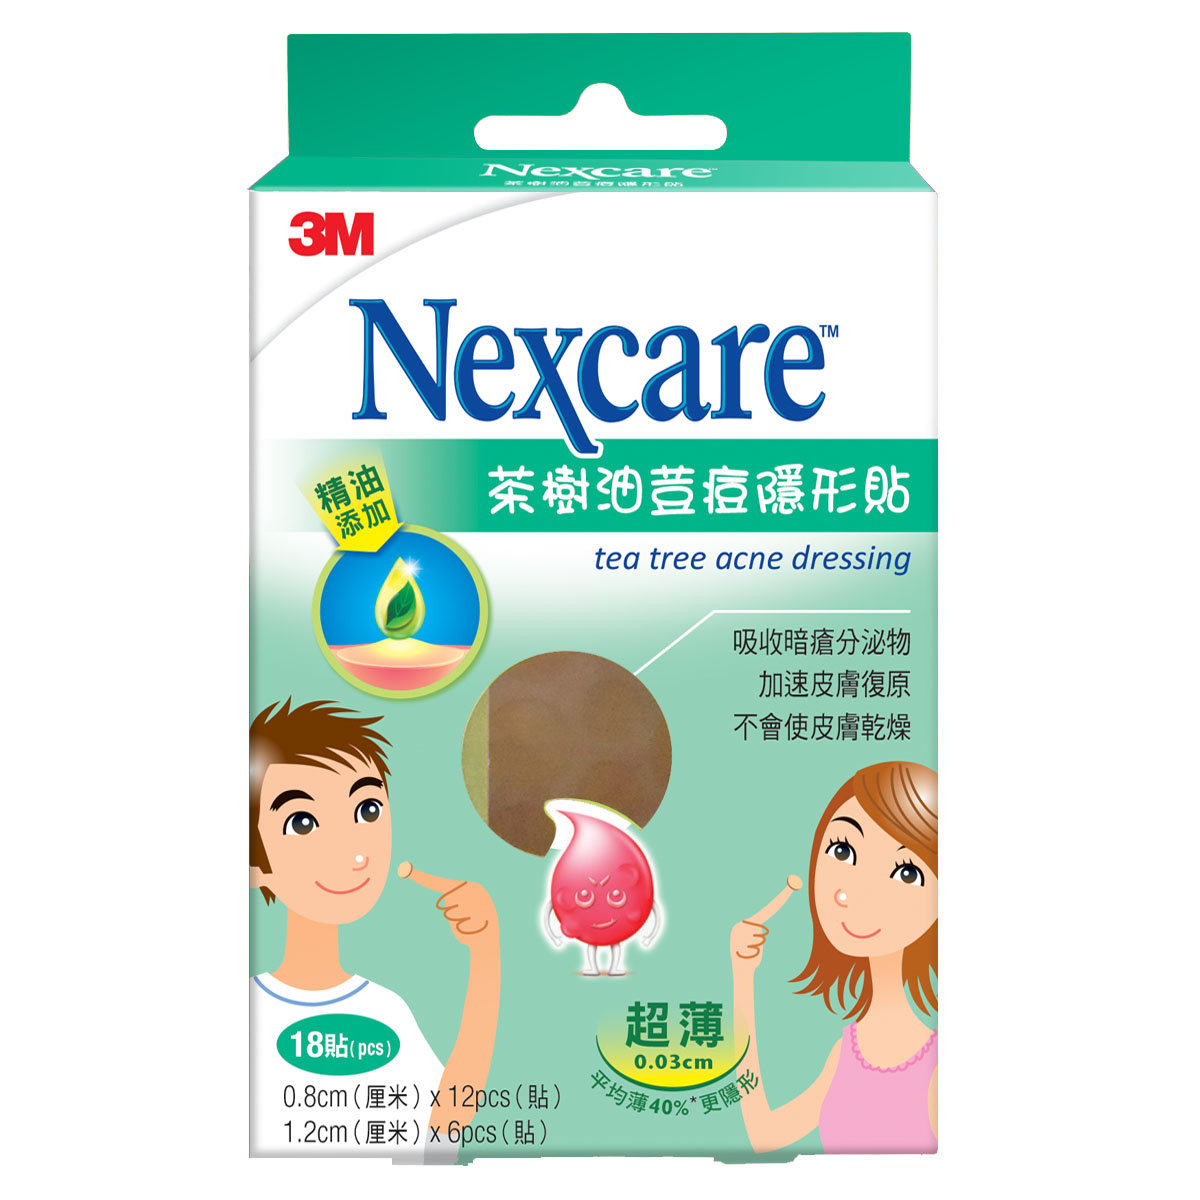 Nexcare™ | Tea Tree Essential Oil Acne Dressing, ETA018, 18 patches/Box  (Can wear with masks) | HKTVmall The Largest HK Shopping Platform